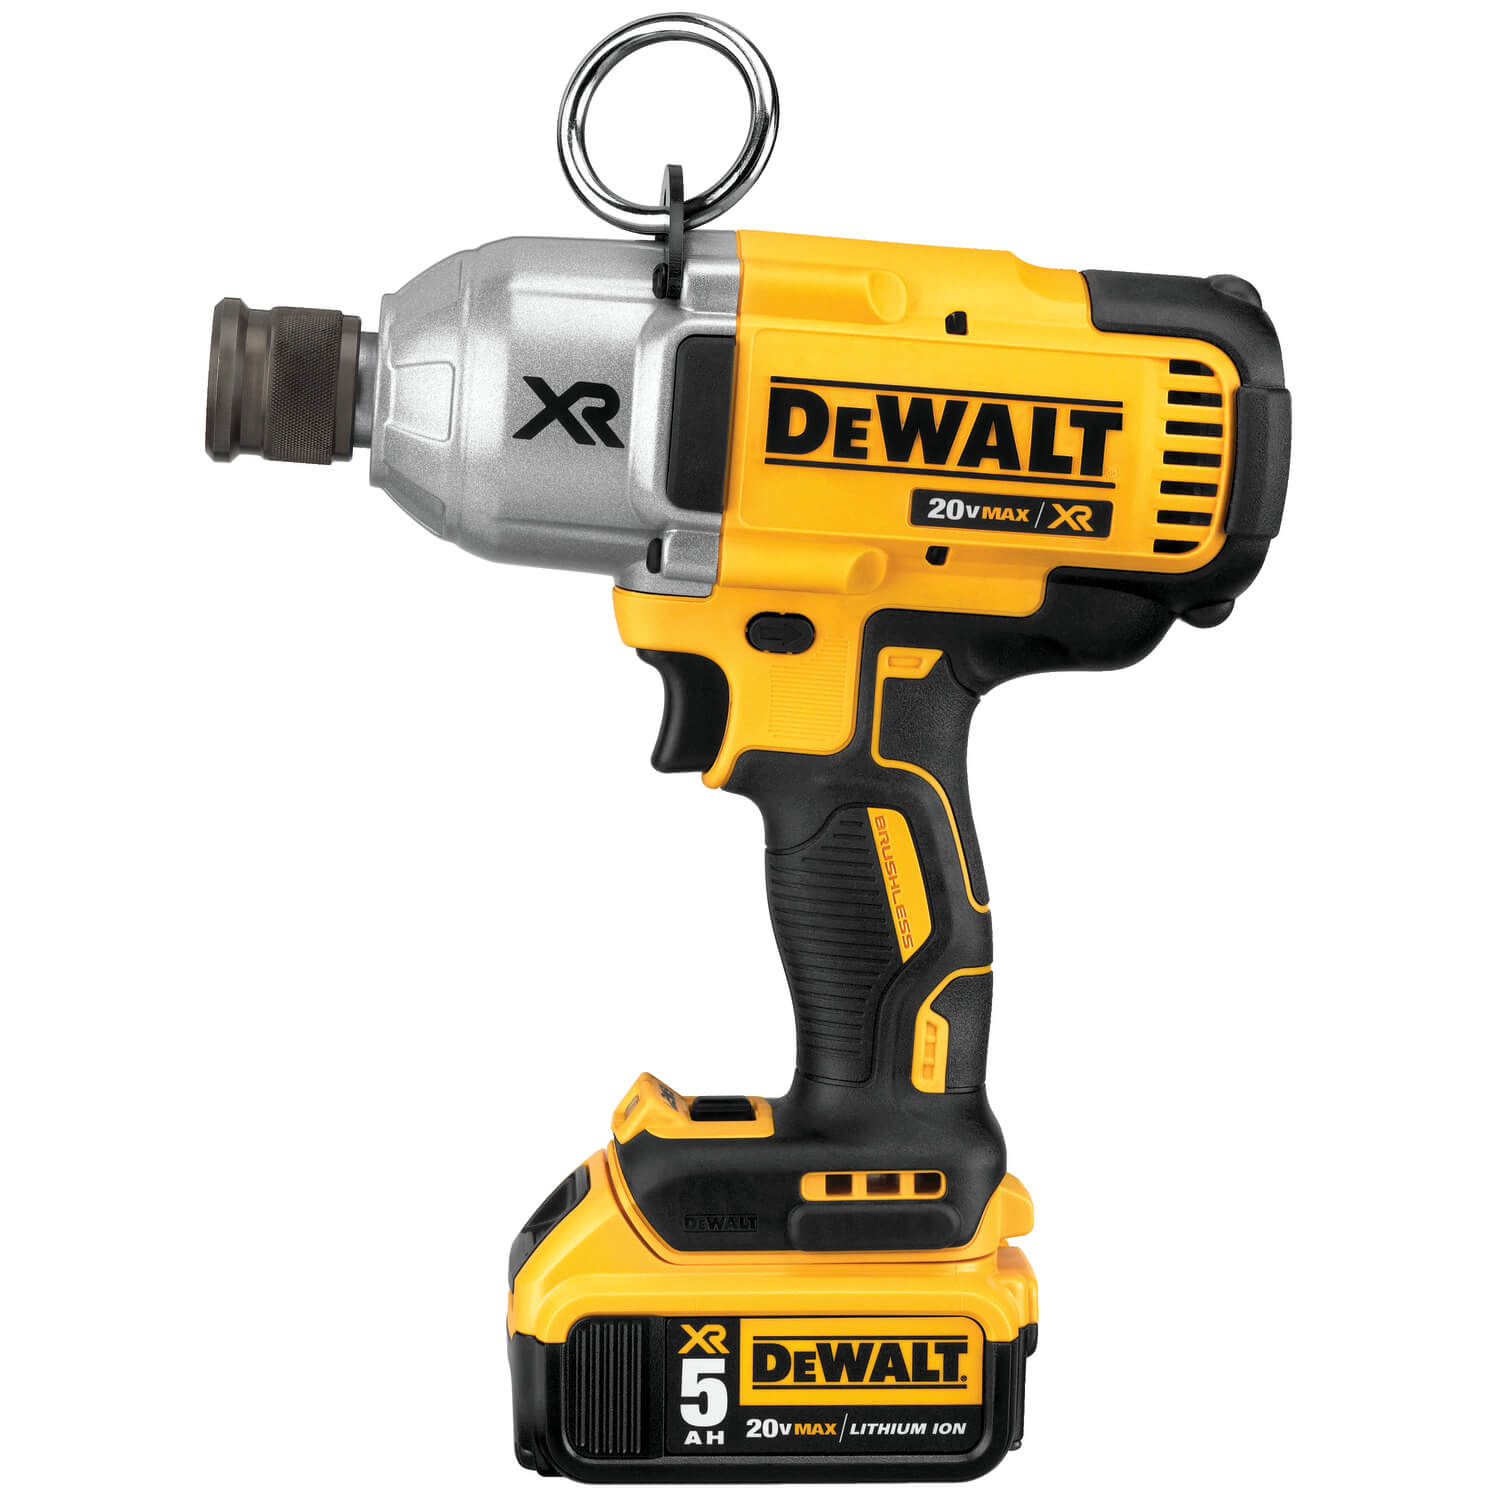 DEWALT DCF898P2 20V MAX XR Brushless High Torque Impact Wrench Kit with QR Chuck - wise-line-tools